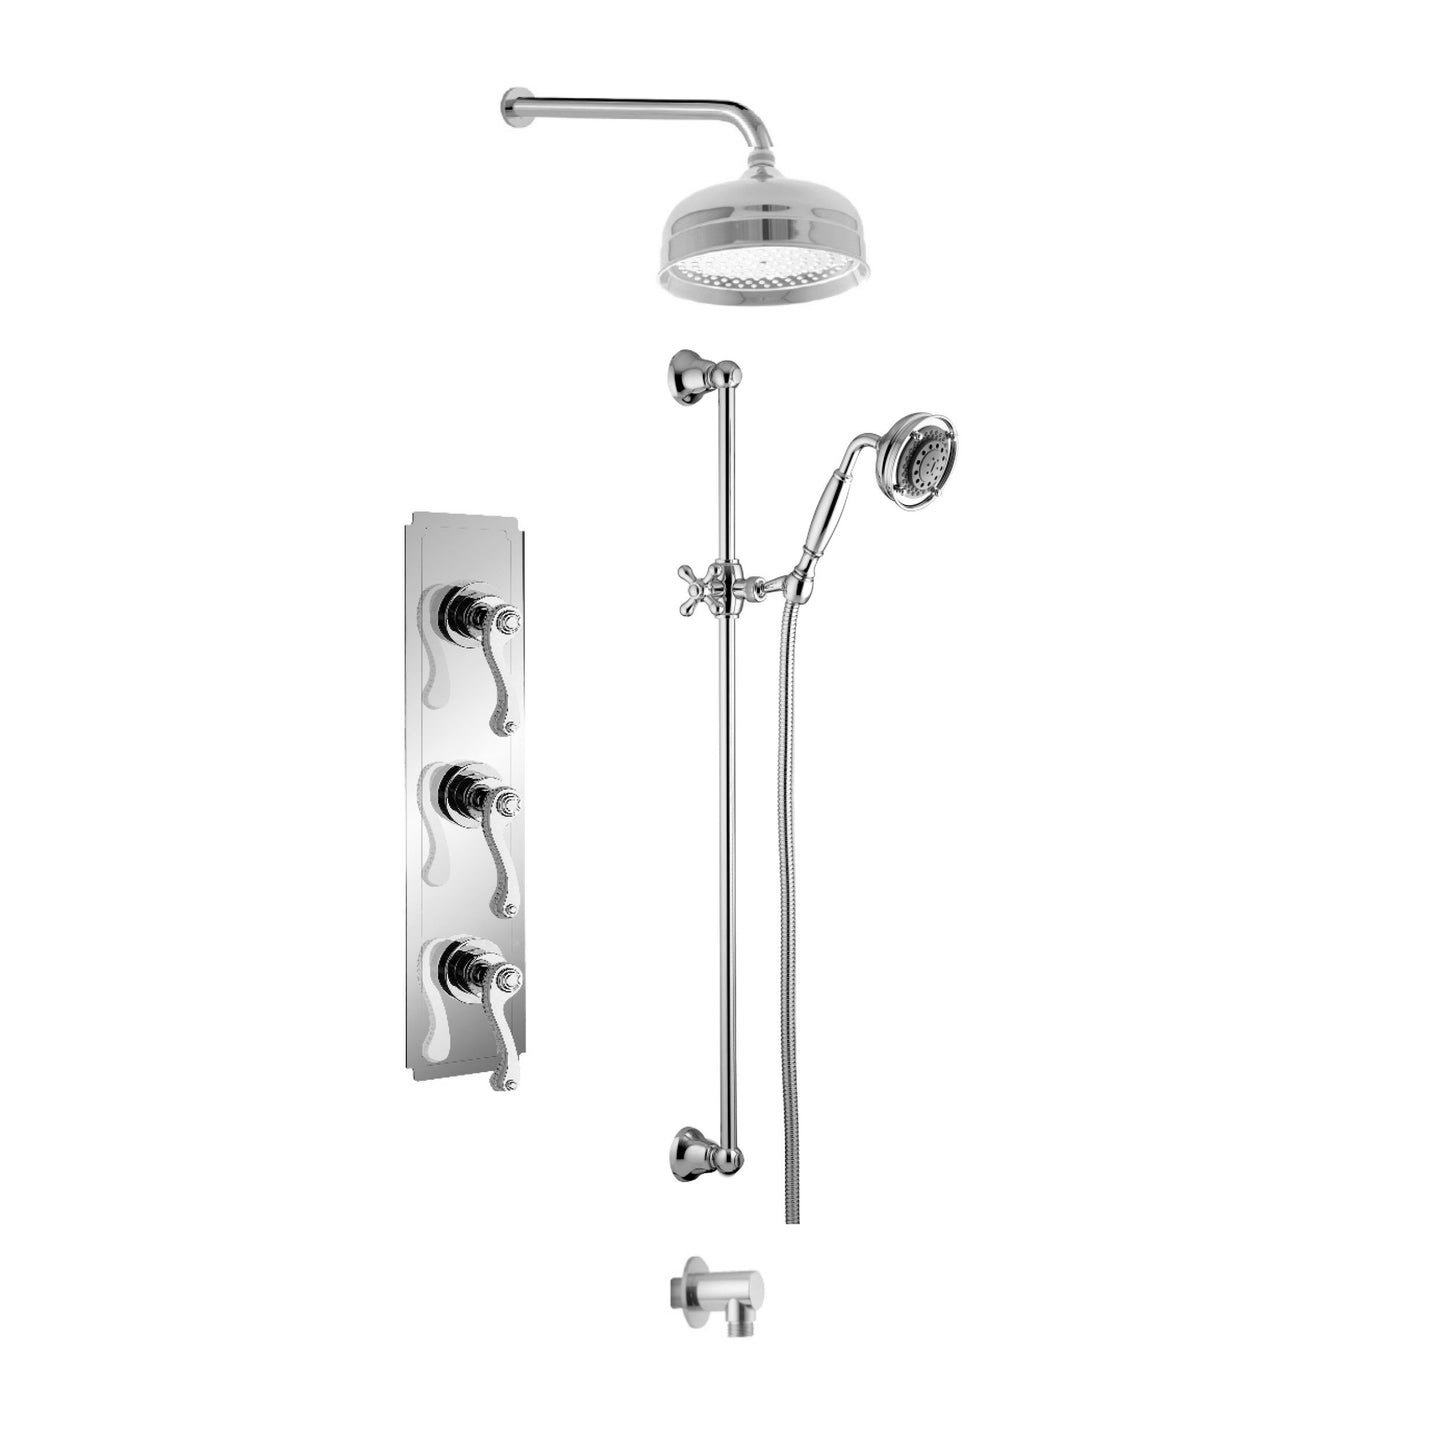 Aquadesign Products Shower Kit (Classic 3712CLAS) - Chrome